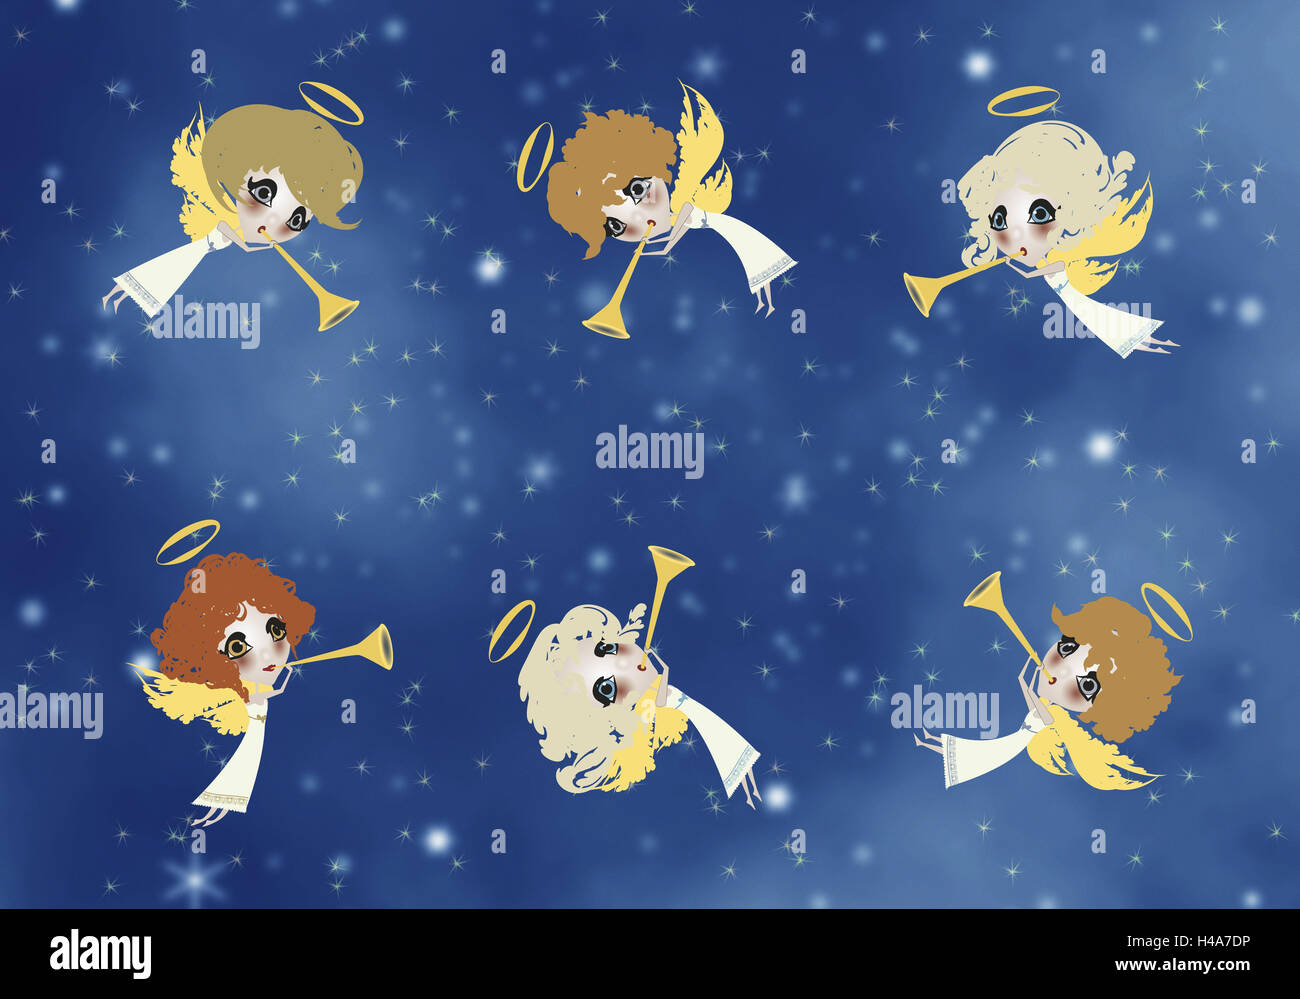 Illustration, sky, angel, six, trumpets, graphics, stars, celestial body, figures, little angels, for Christmas, heavenly, differently, halo, wing, fly, play music, musician, make music, trombones, group, orchestras, together, together, whole body, Stock Photo